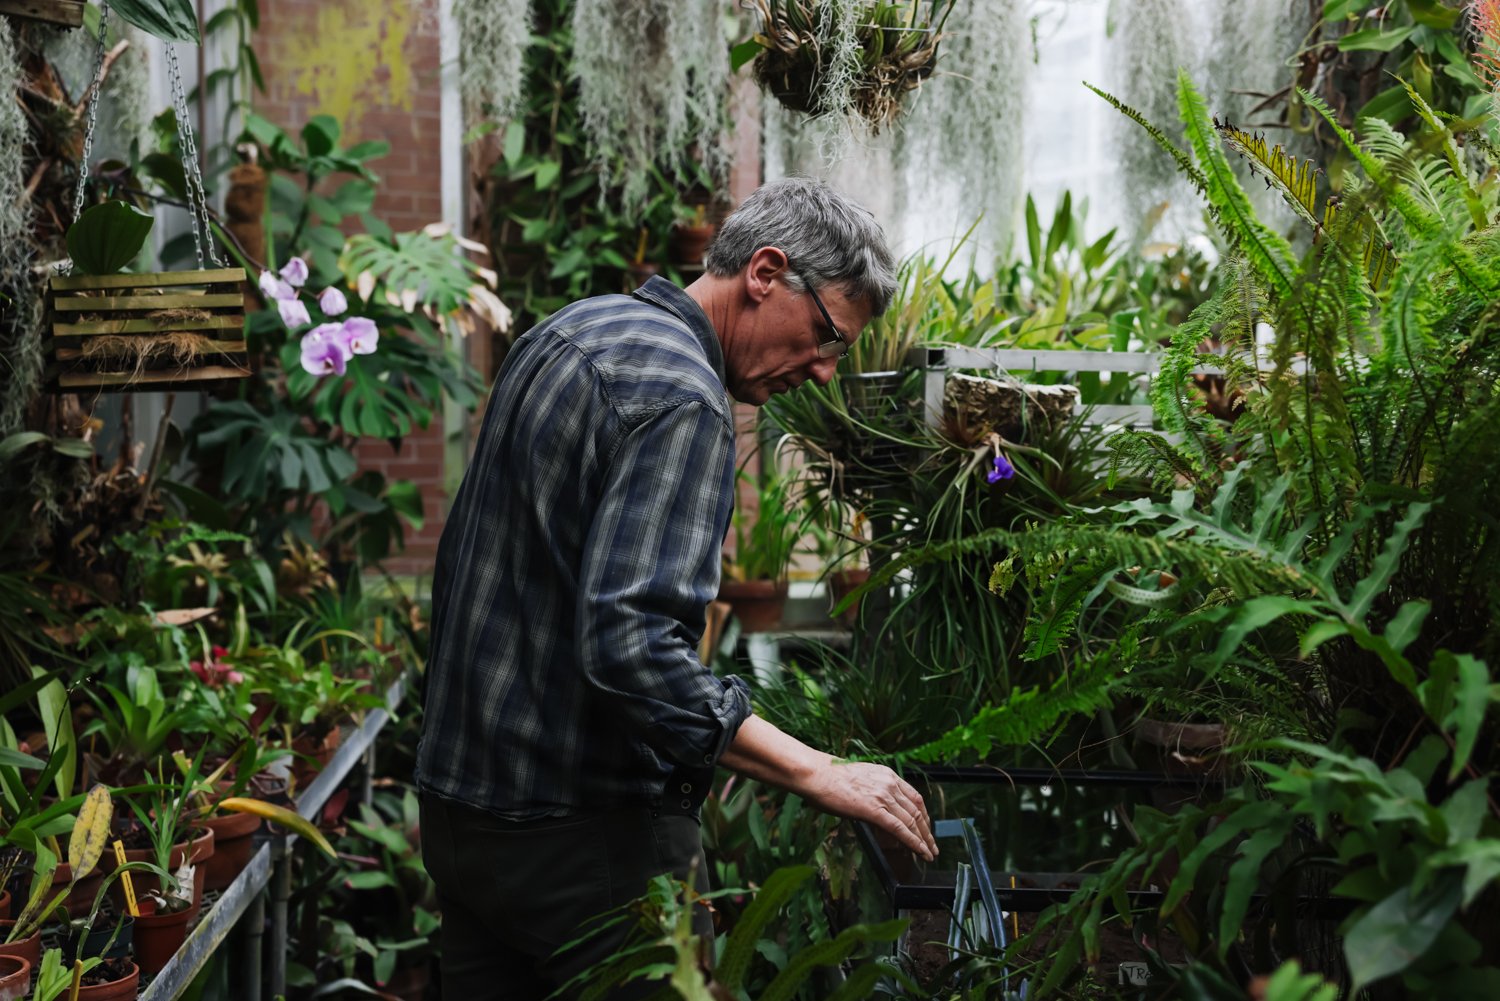  Bill Cole steps into a greenhouse and immediately identifies a plant that needs to be moved from a smaller to a larger pot. In one of the experimental greenhouses, he checks the progress of the experiment and quickly assesses what needs to be done n